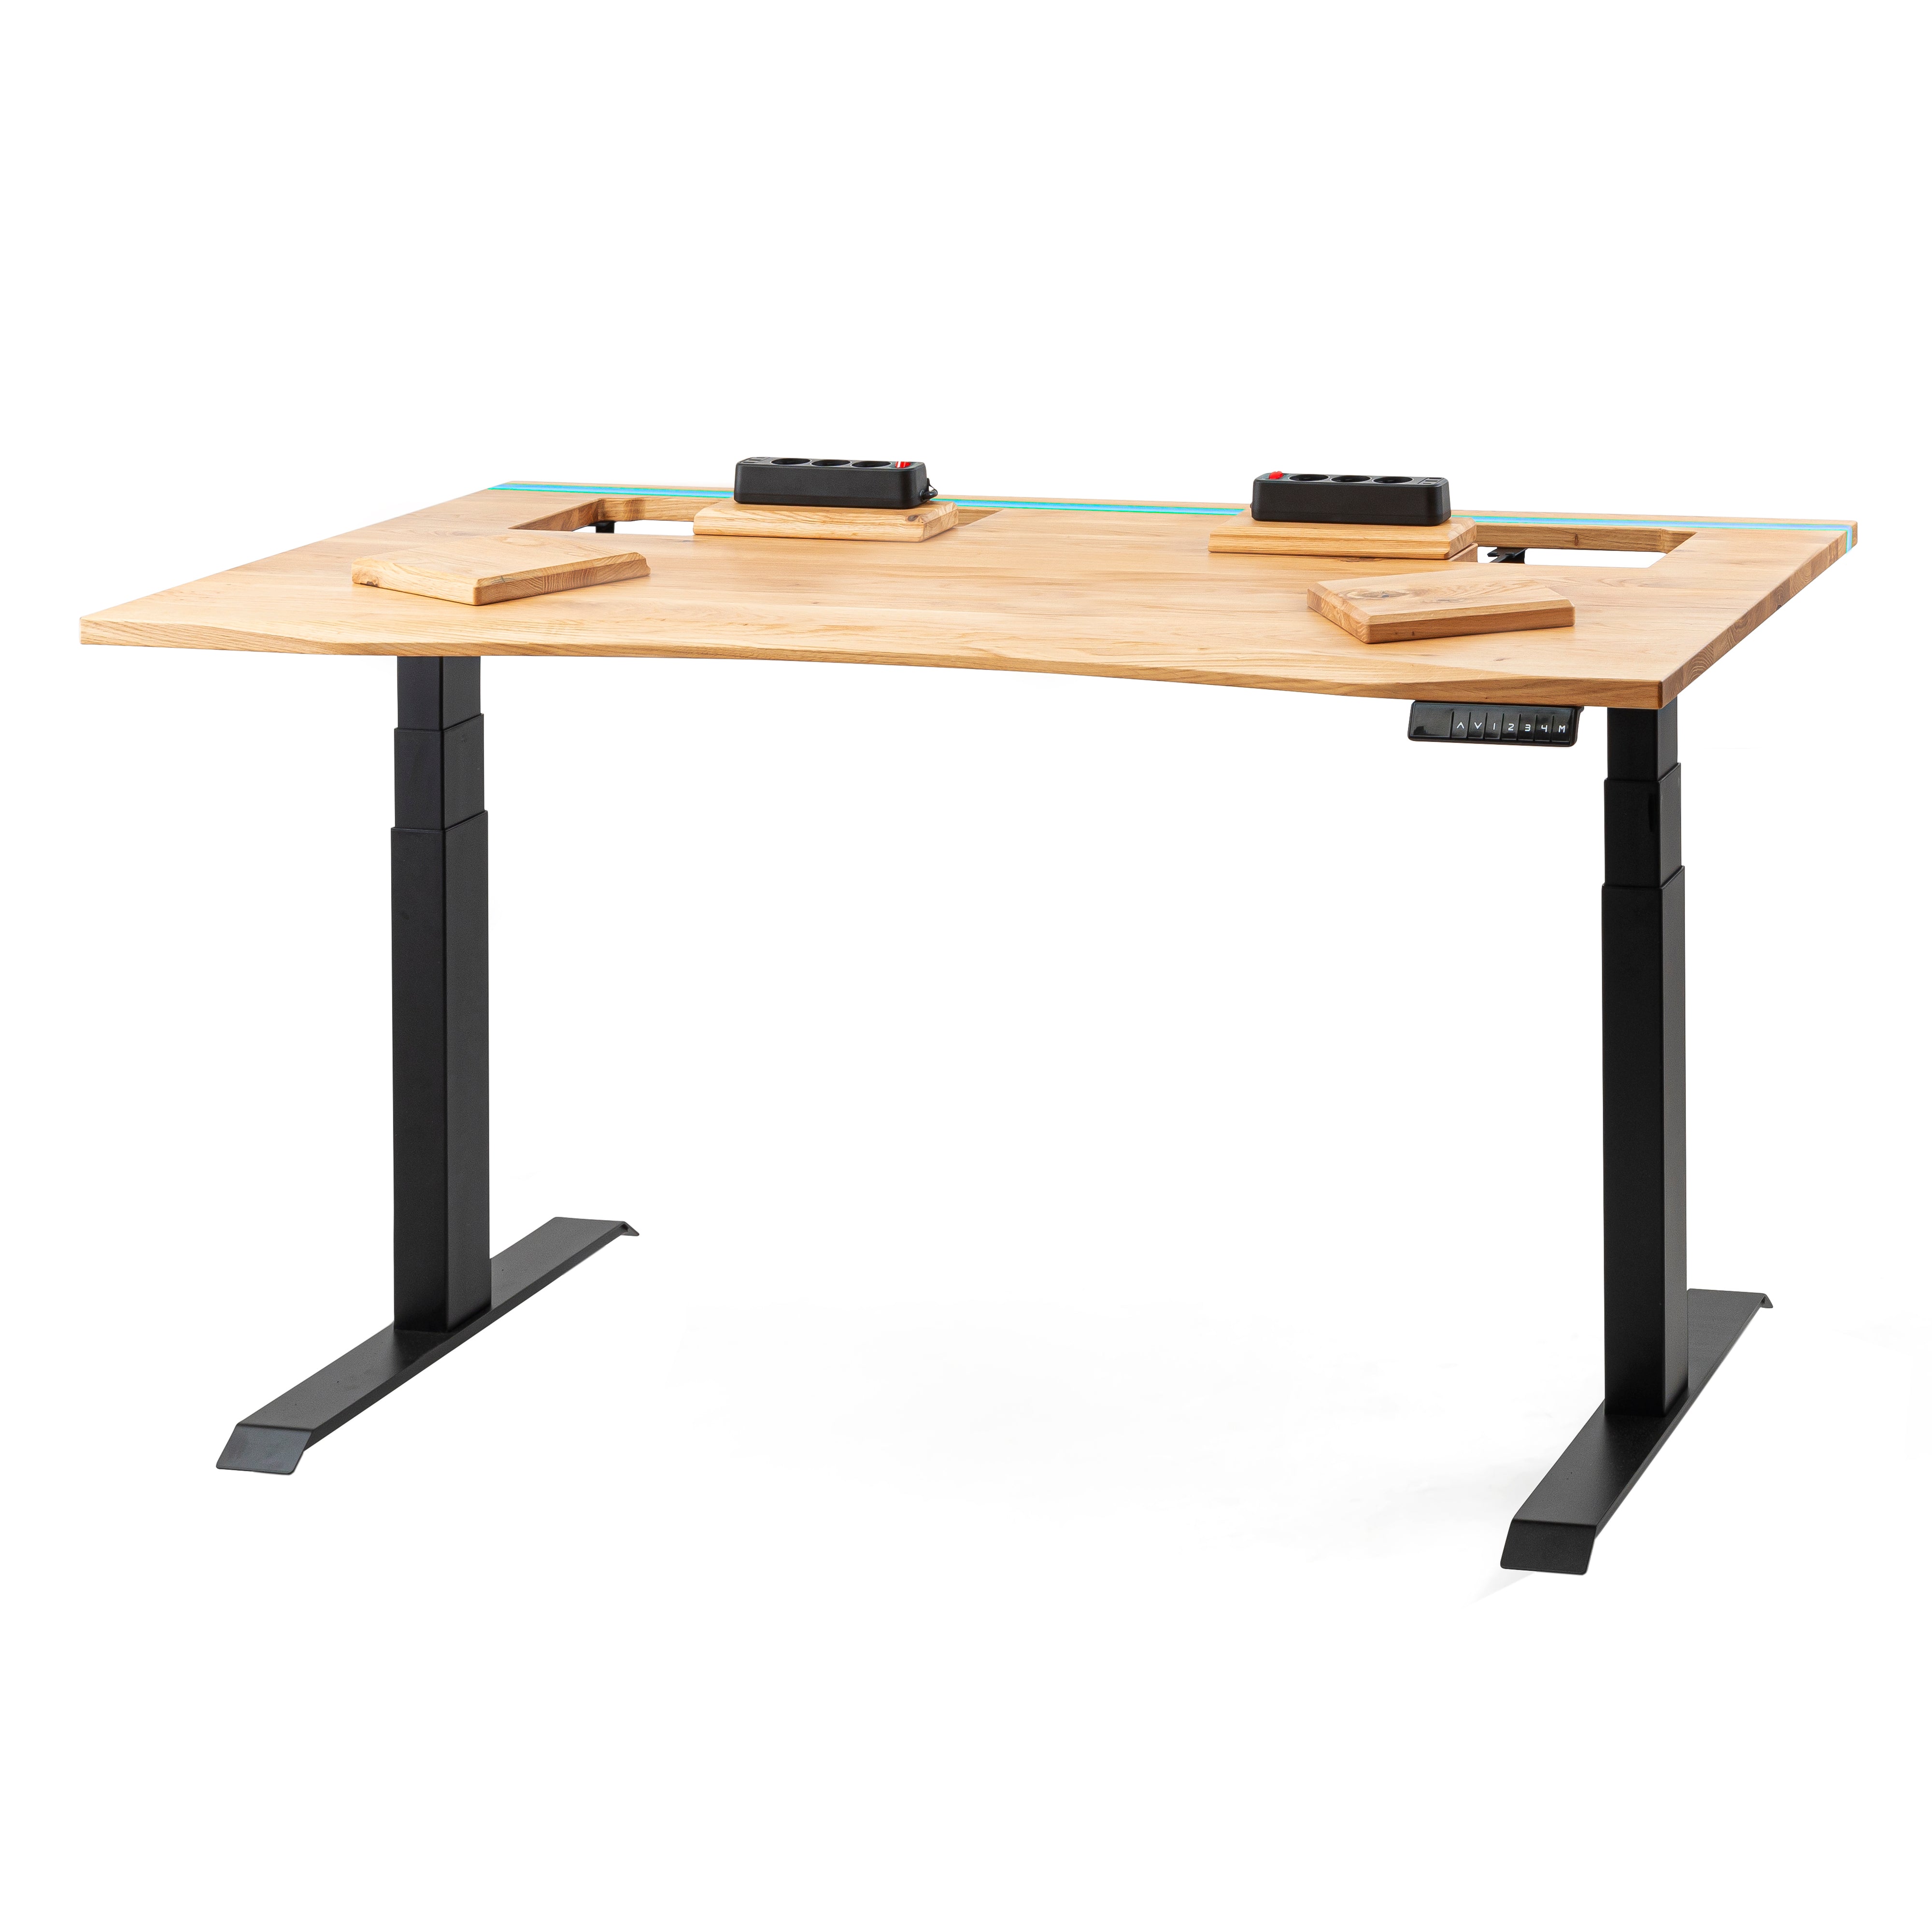 Oak standing desk with epoxy LED light and extended cable management unit